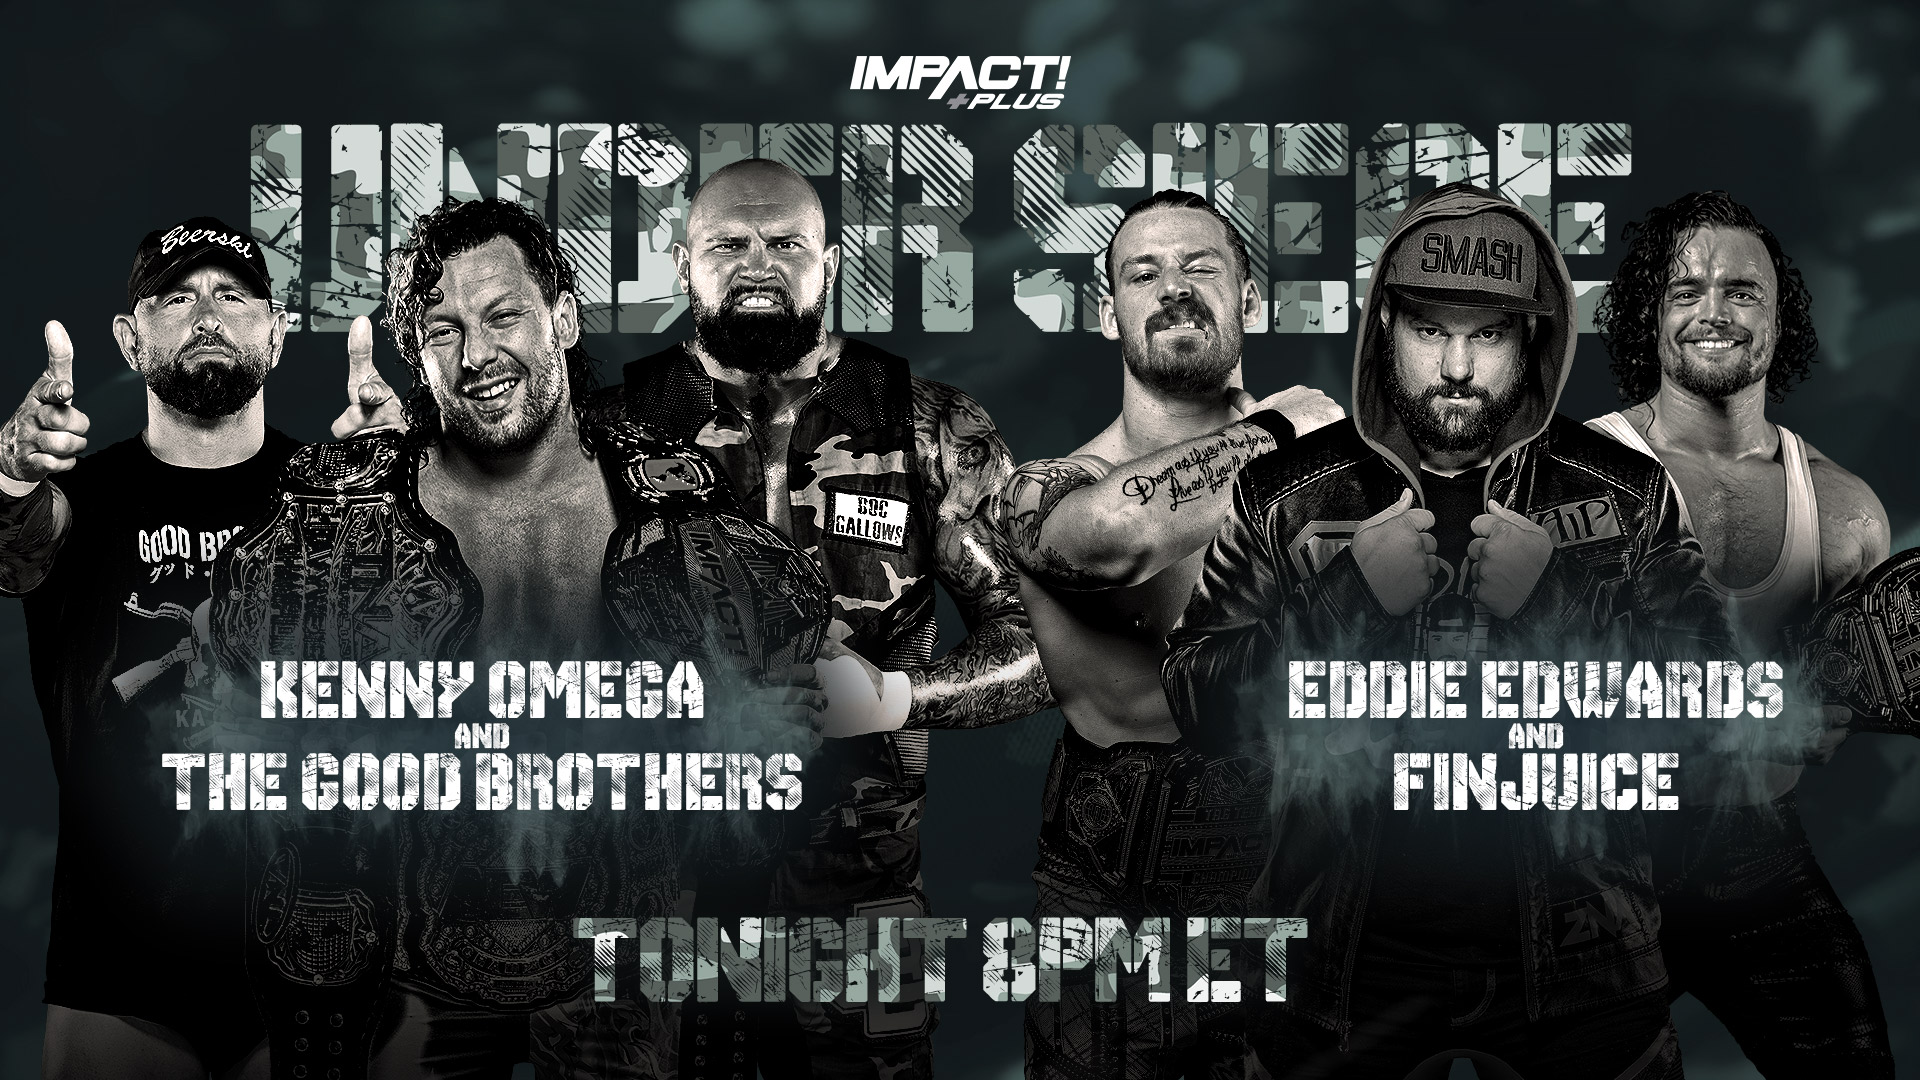 IMPACT UNDER SIEGE New champions crowned, Kenny Omega receives next